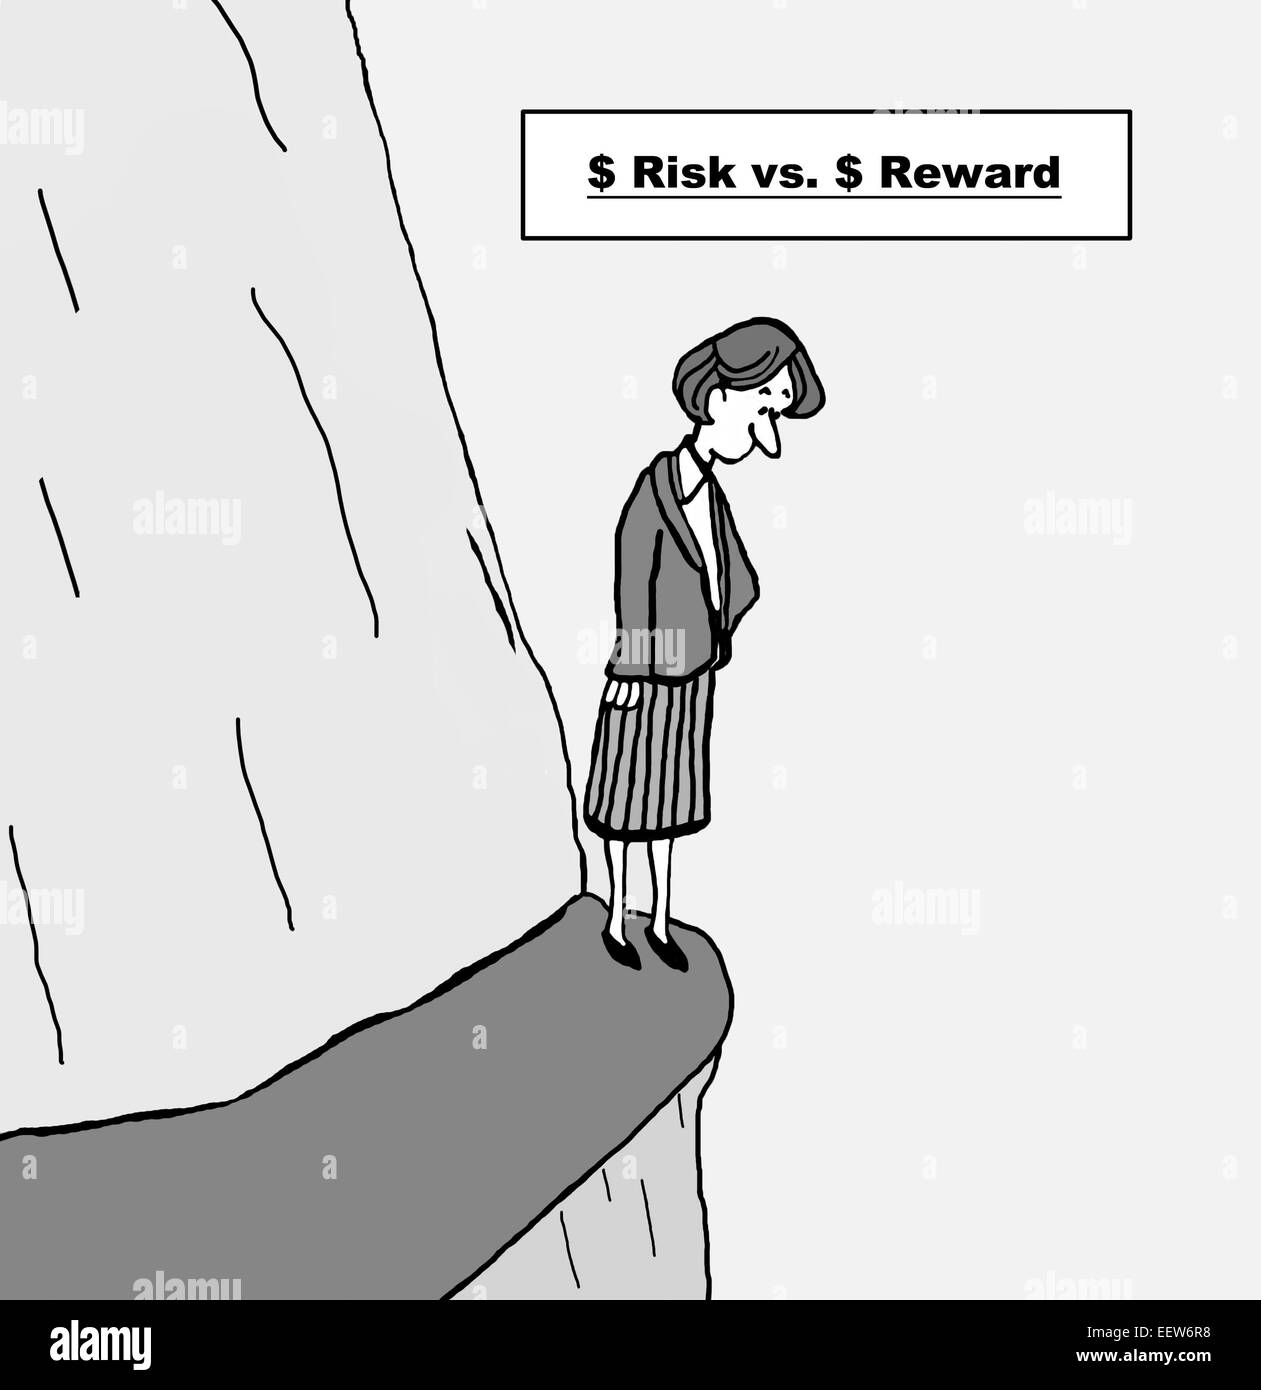 Cartoon of businesswoman evaluating the dollar risk versus dollar reward of a new business opportunity. Stock Photo